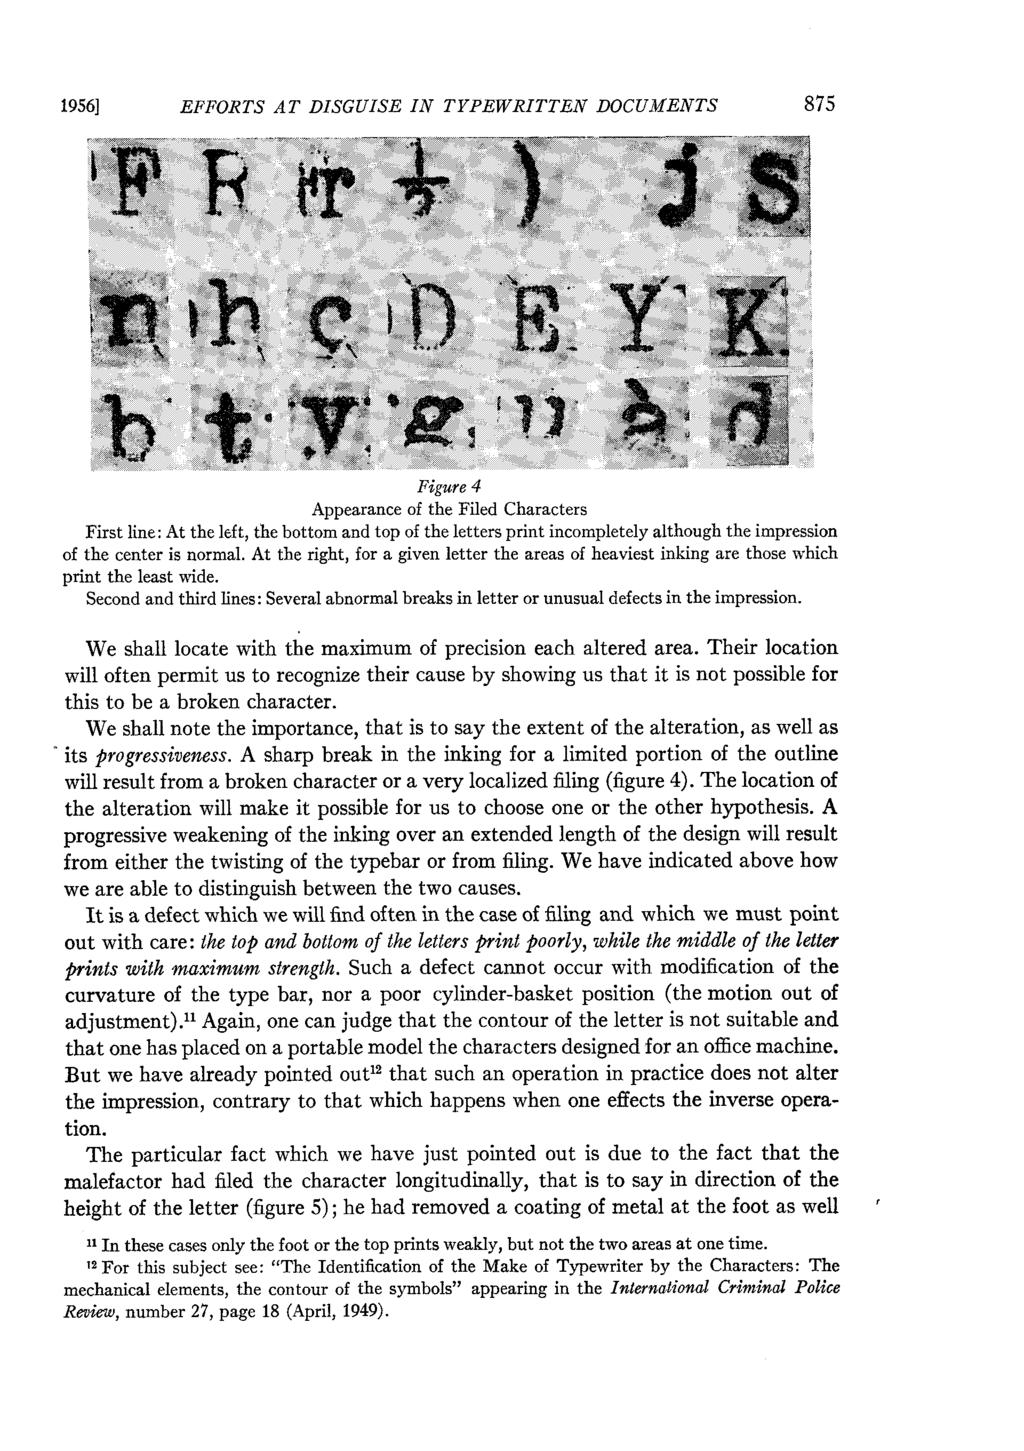 1956] EFFORTS AT DISGUISE IN TYPEWRITTEN DOCUMENTS Figure 4 Appearance of the Filed Characters First line: At the left, the bottom and top of the letters print incompletely although the impression of